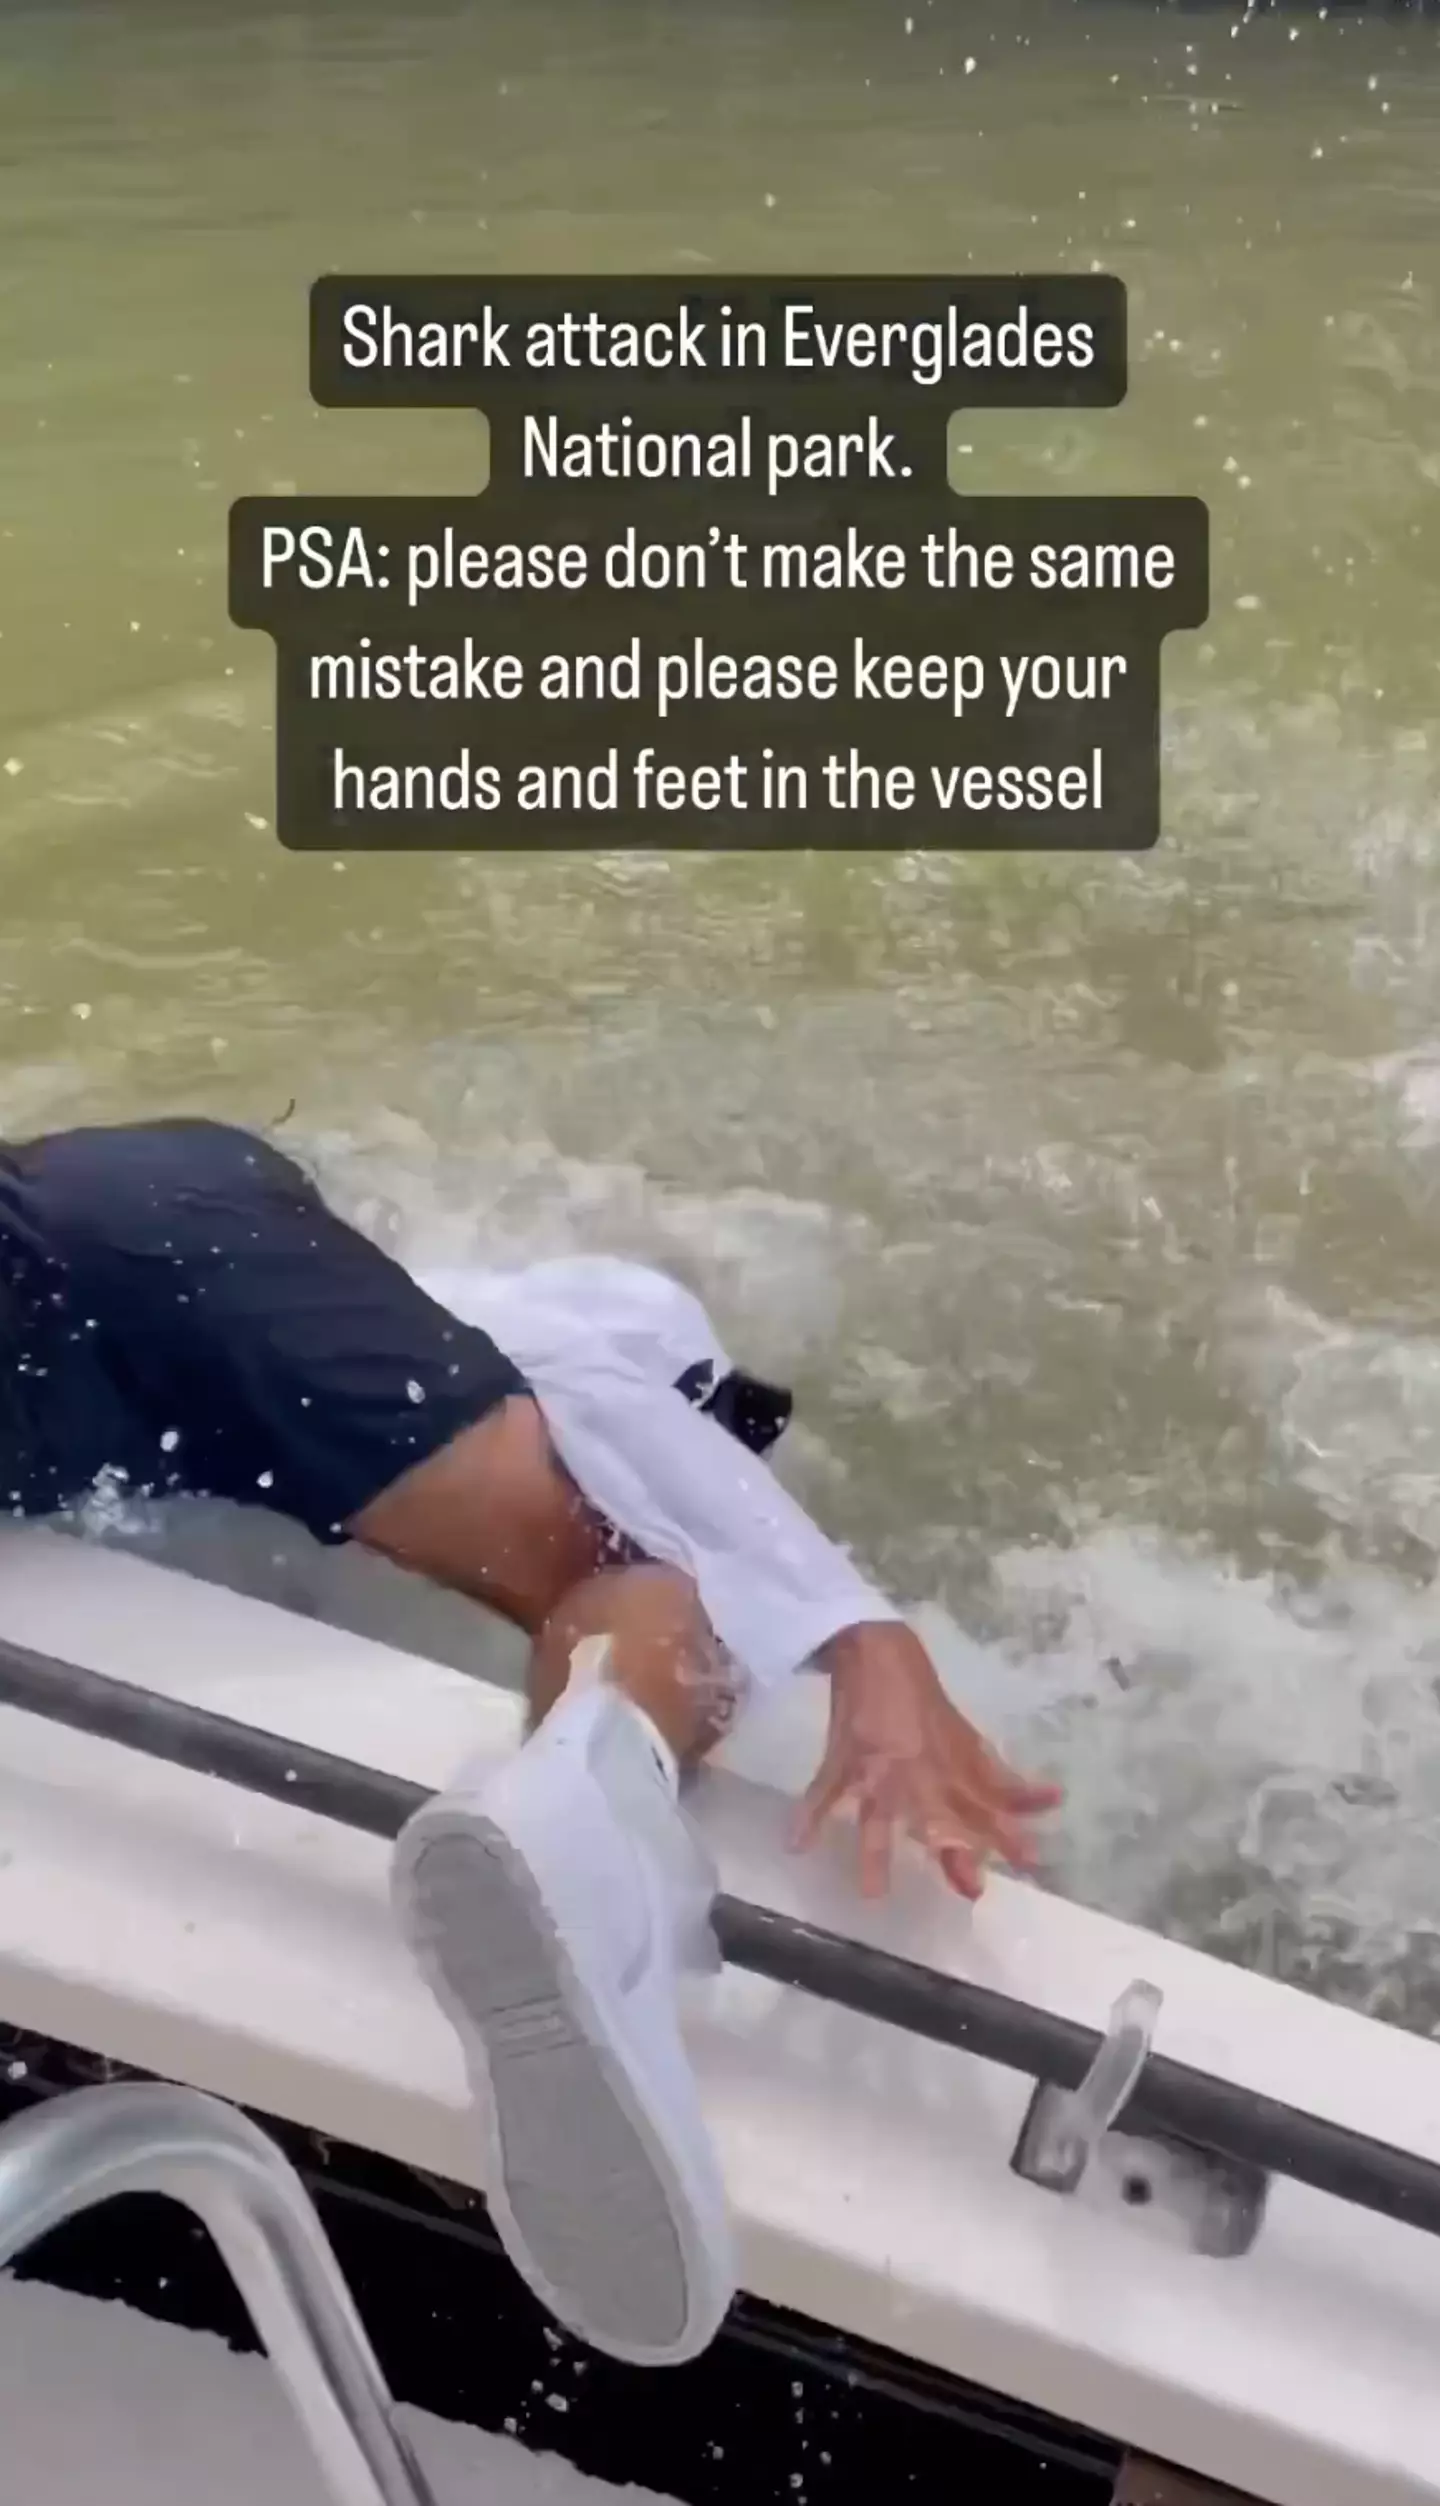 He was pulled into the water.